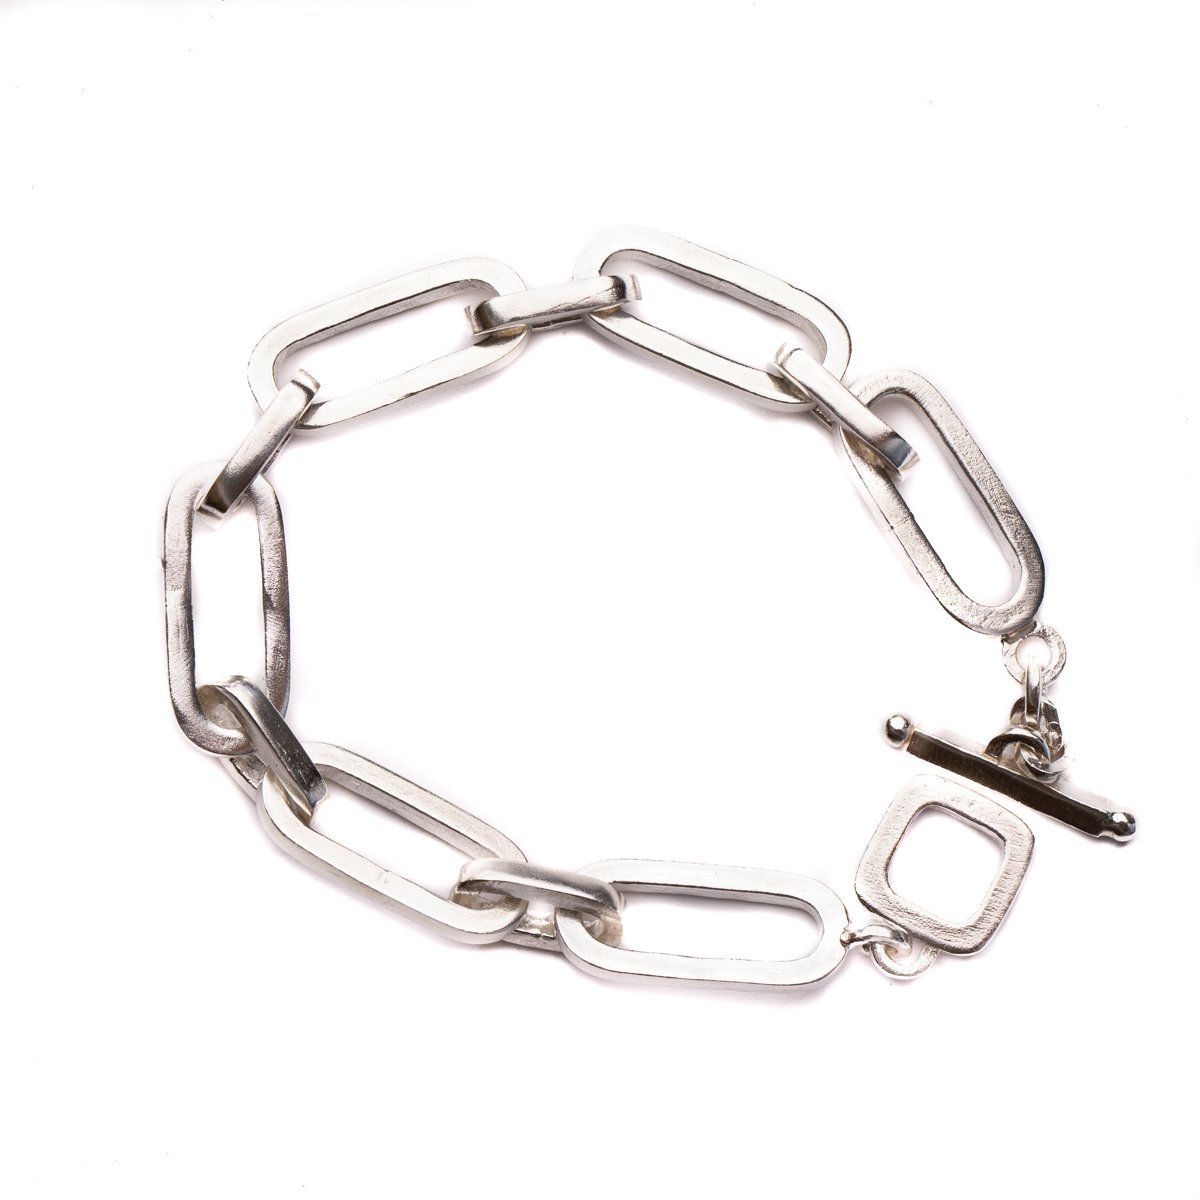 Chain Link Bracelet | 925 Sterling Silver 21 cm / 8.26 Inches